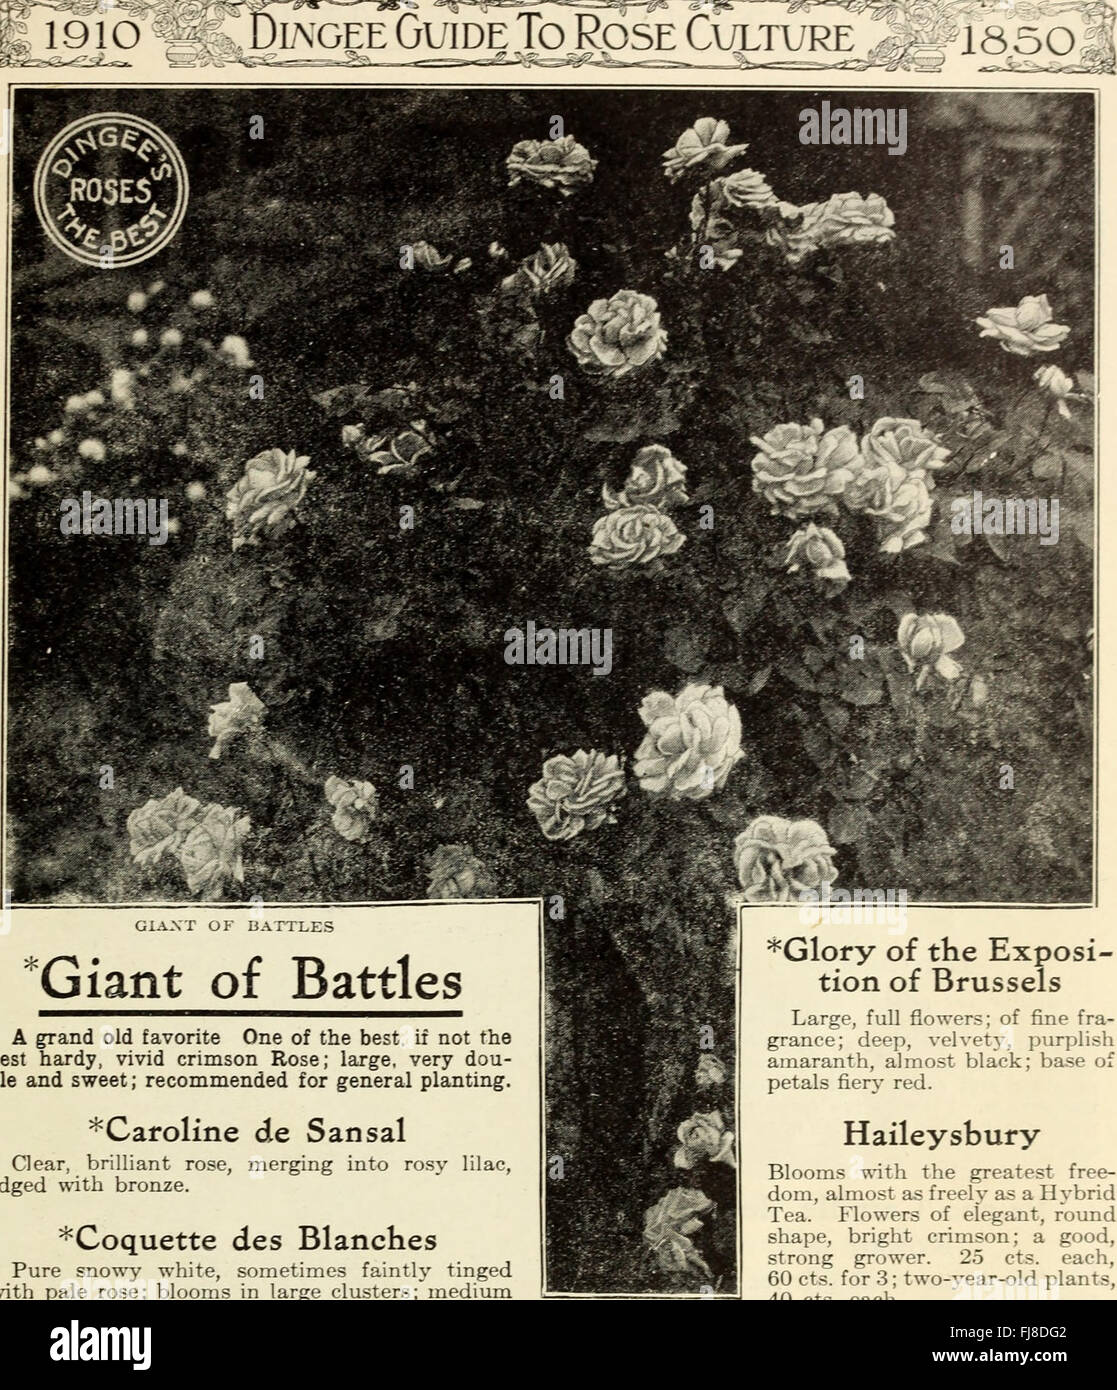 Dingee guide to rose culture - 1850 1910 (1910) Stock Photo